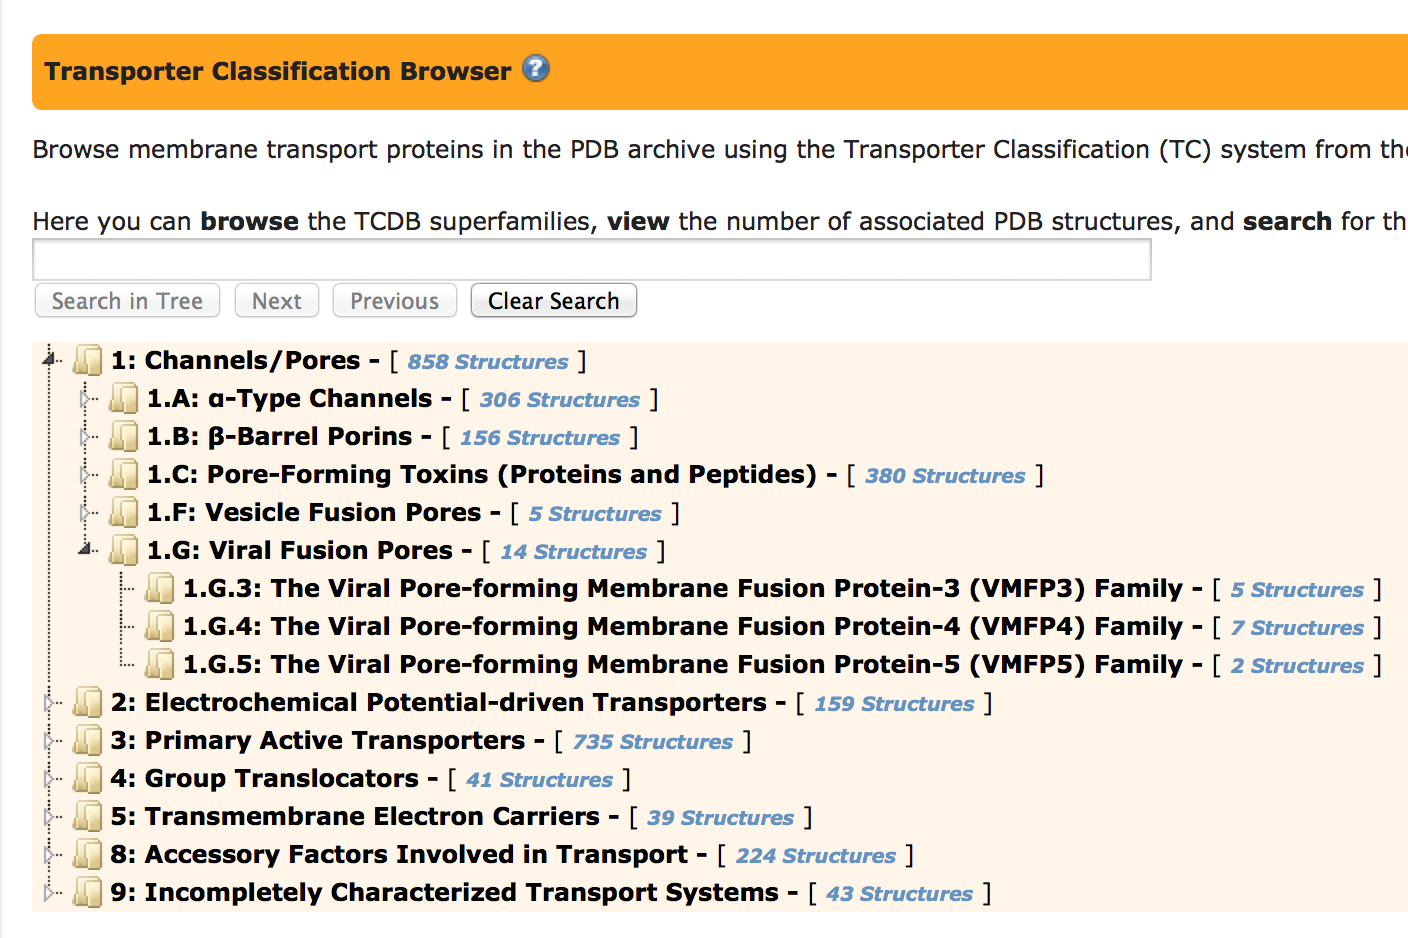 Use the Transporter Classification Browser to find PDB's membrane transport proteins 